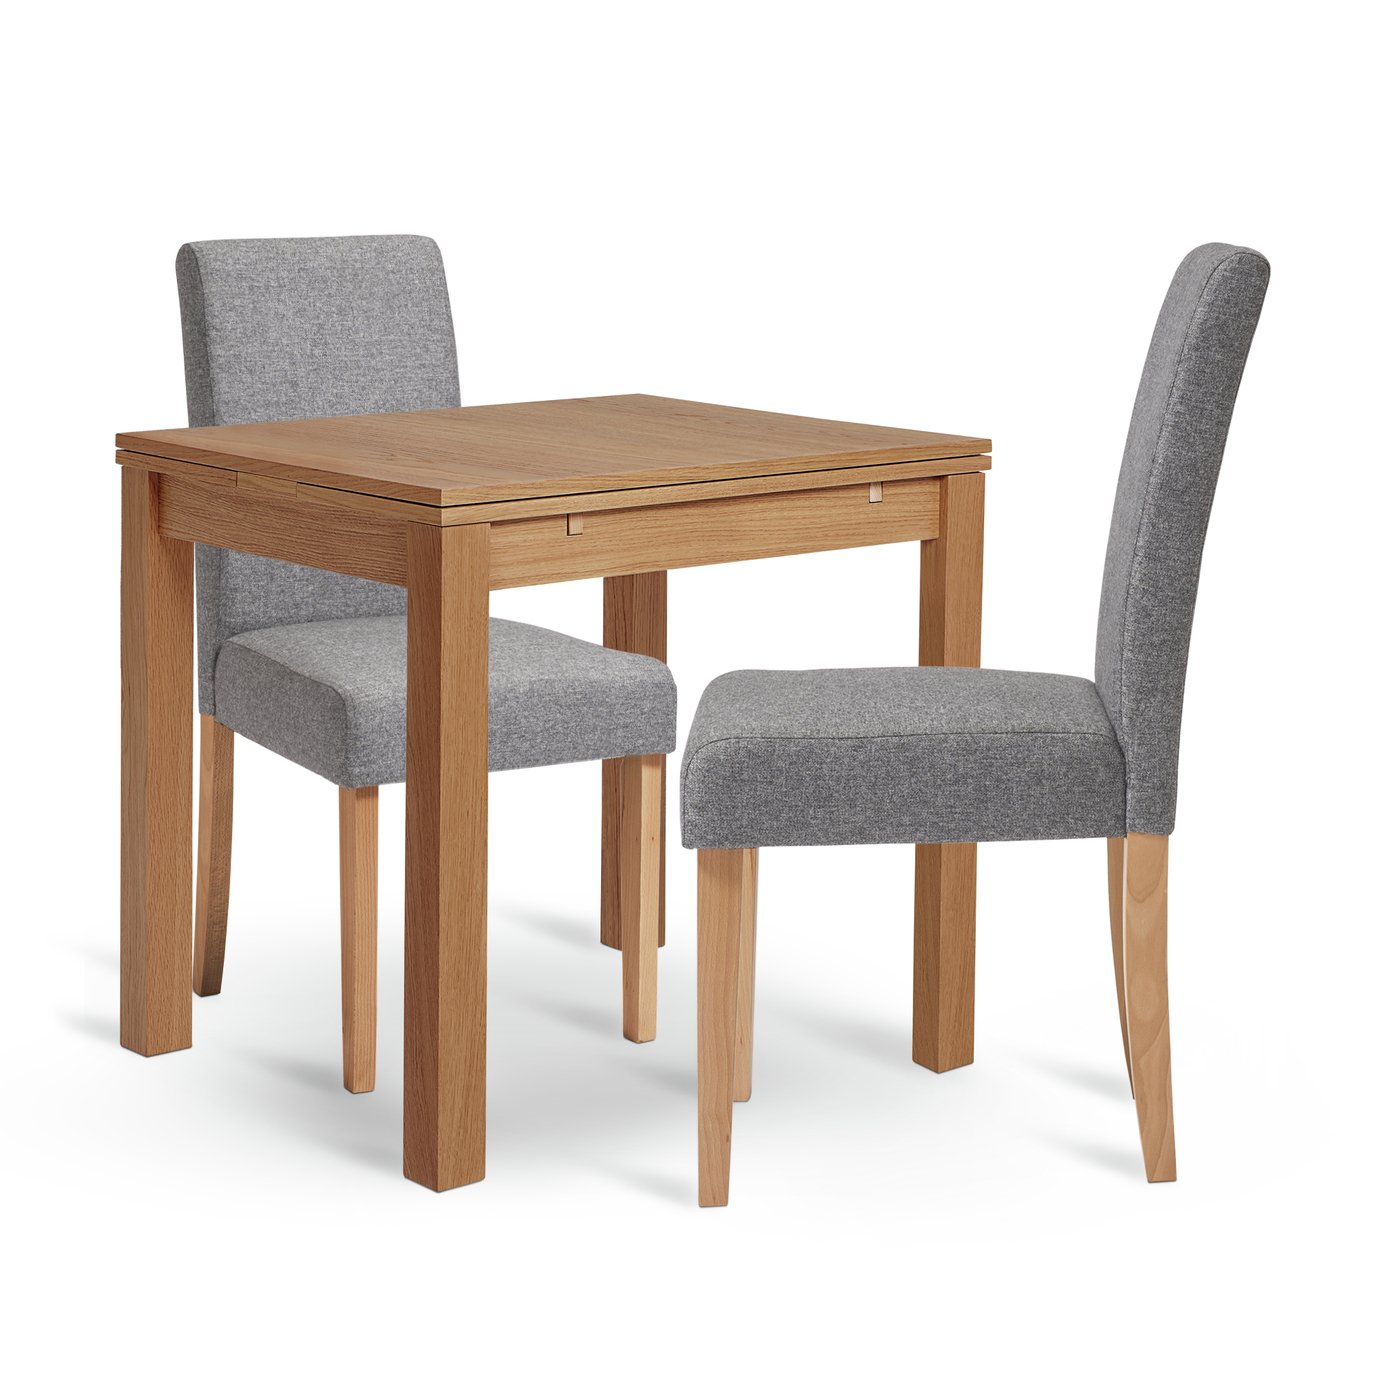 Habitat Clifton Wood Dining Table & 2 Grey Chairs